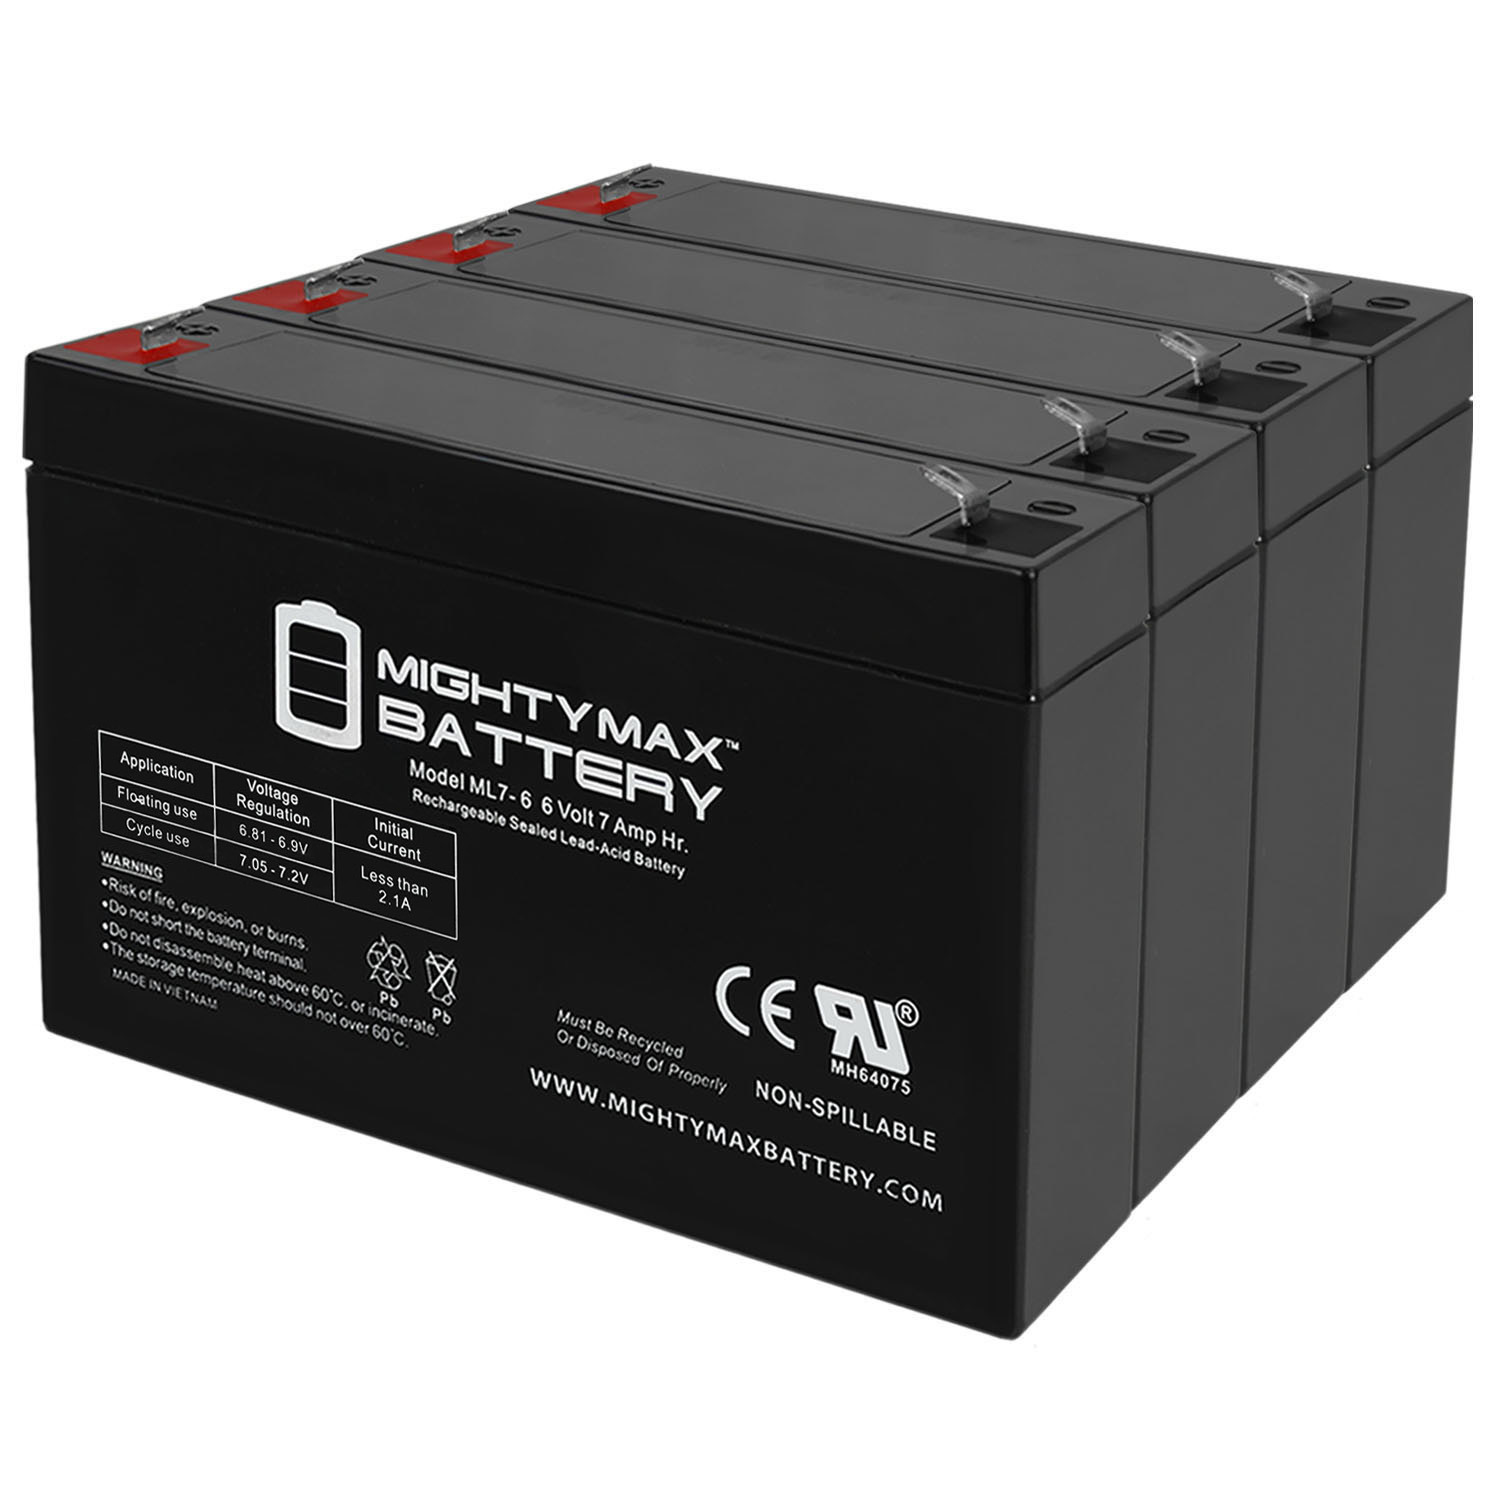 6V 7Ah SLA Replacement Battery for Sure-Lites AA1, A12 - 4 Pack